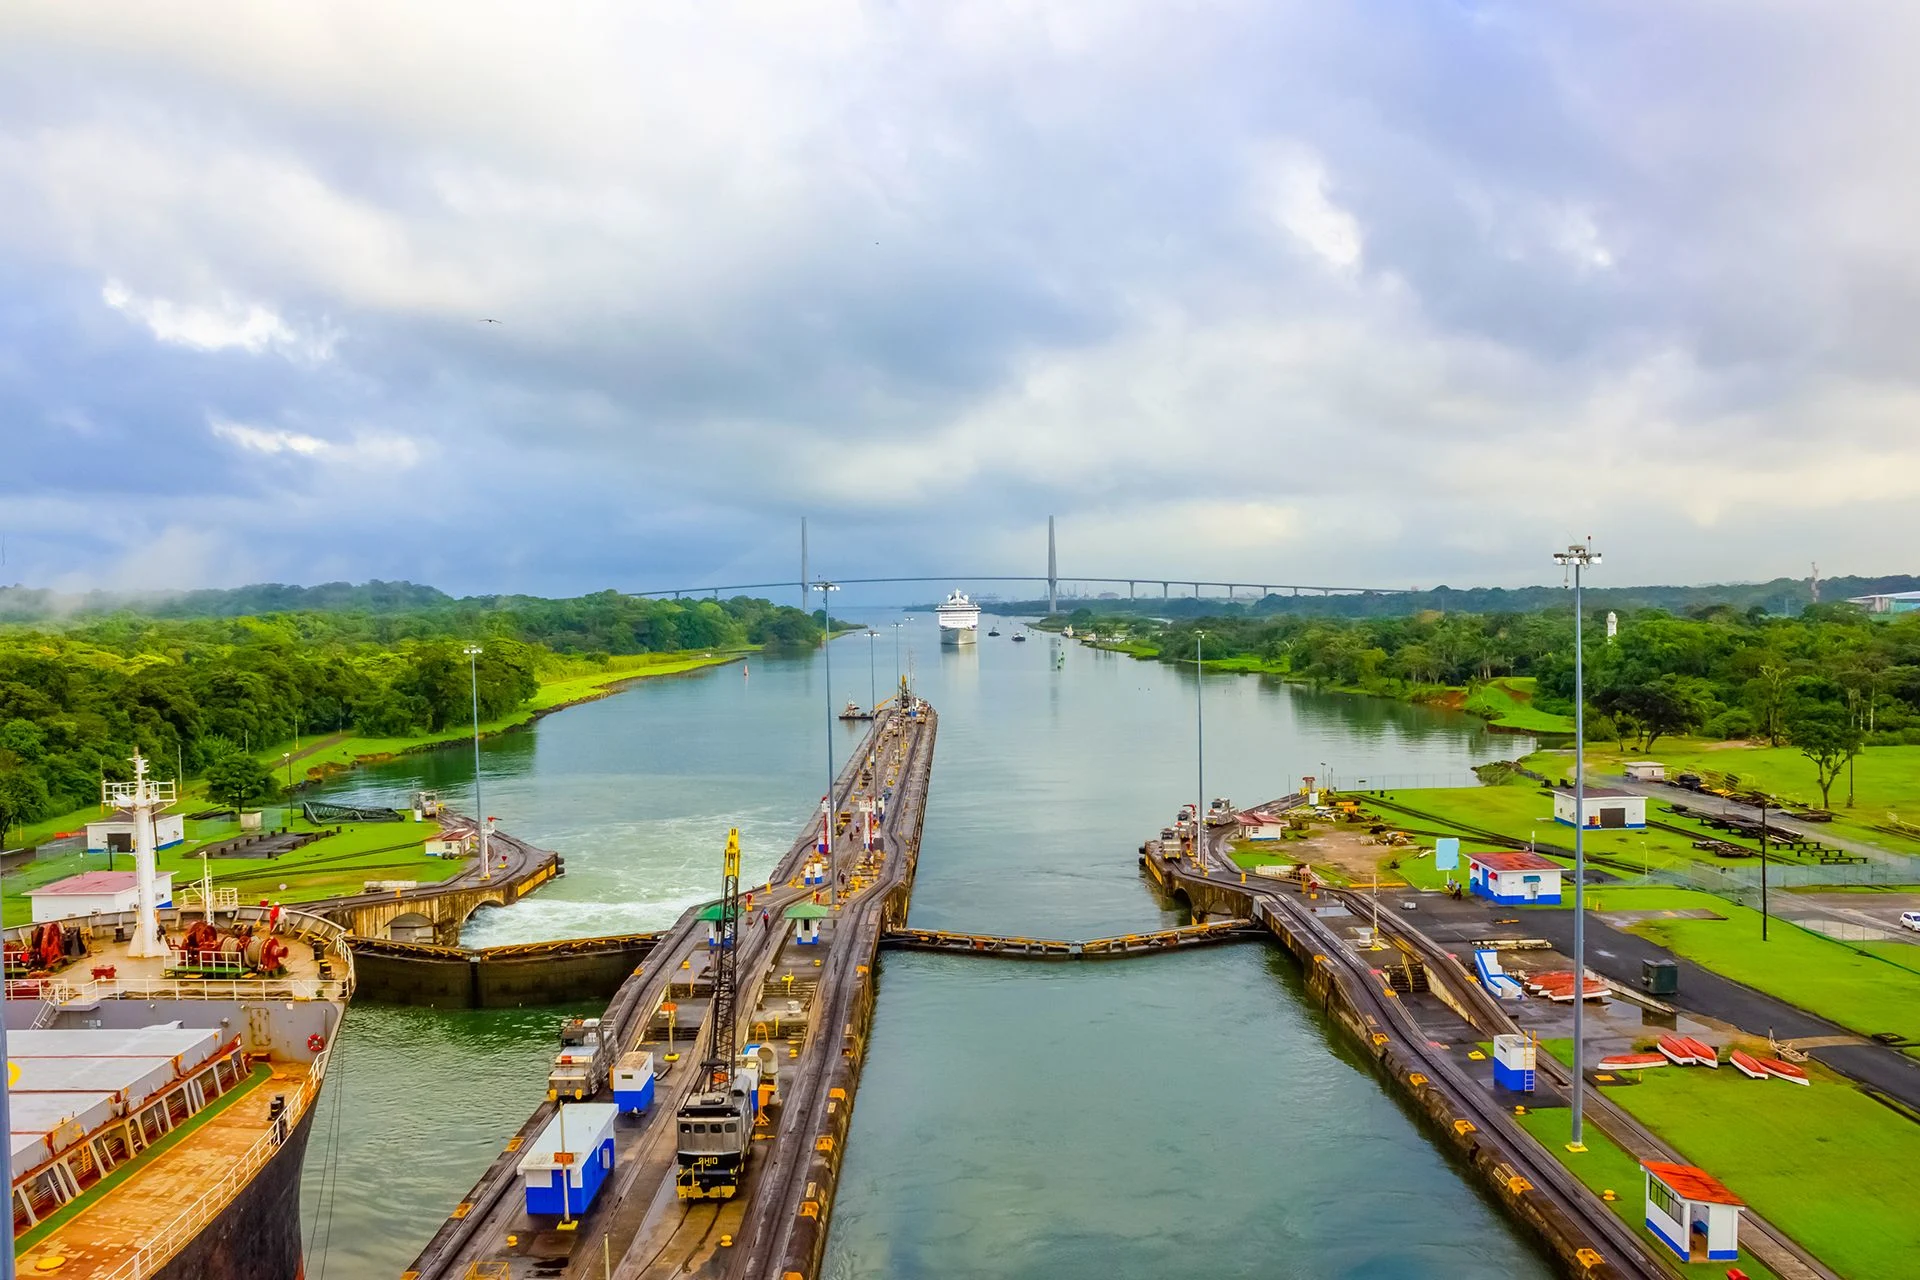 A view of the Panama Canal from a cruise ship. Photo: Shutterstock.